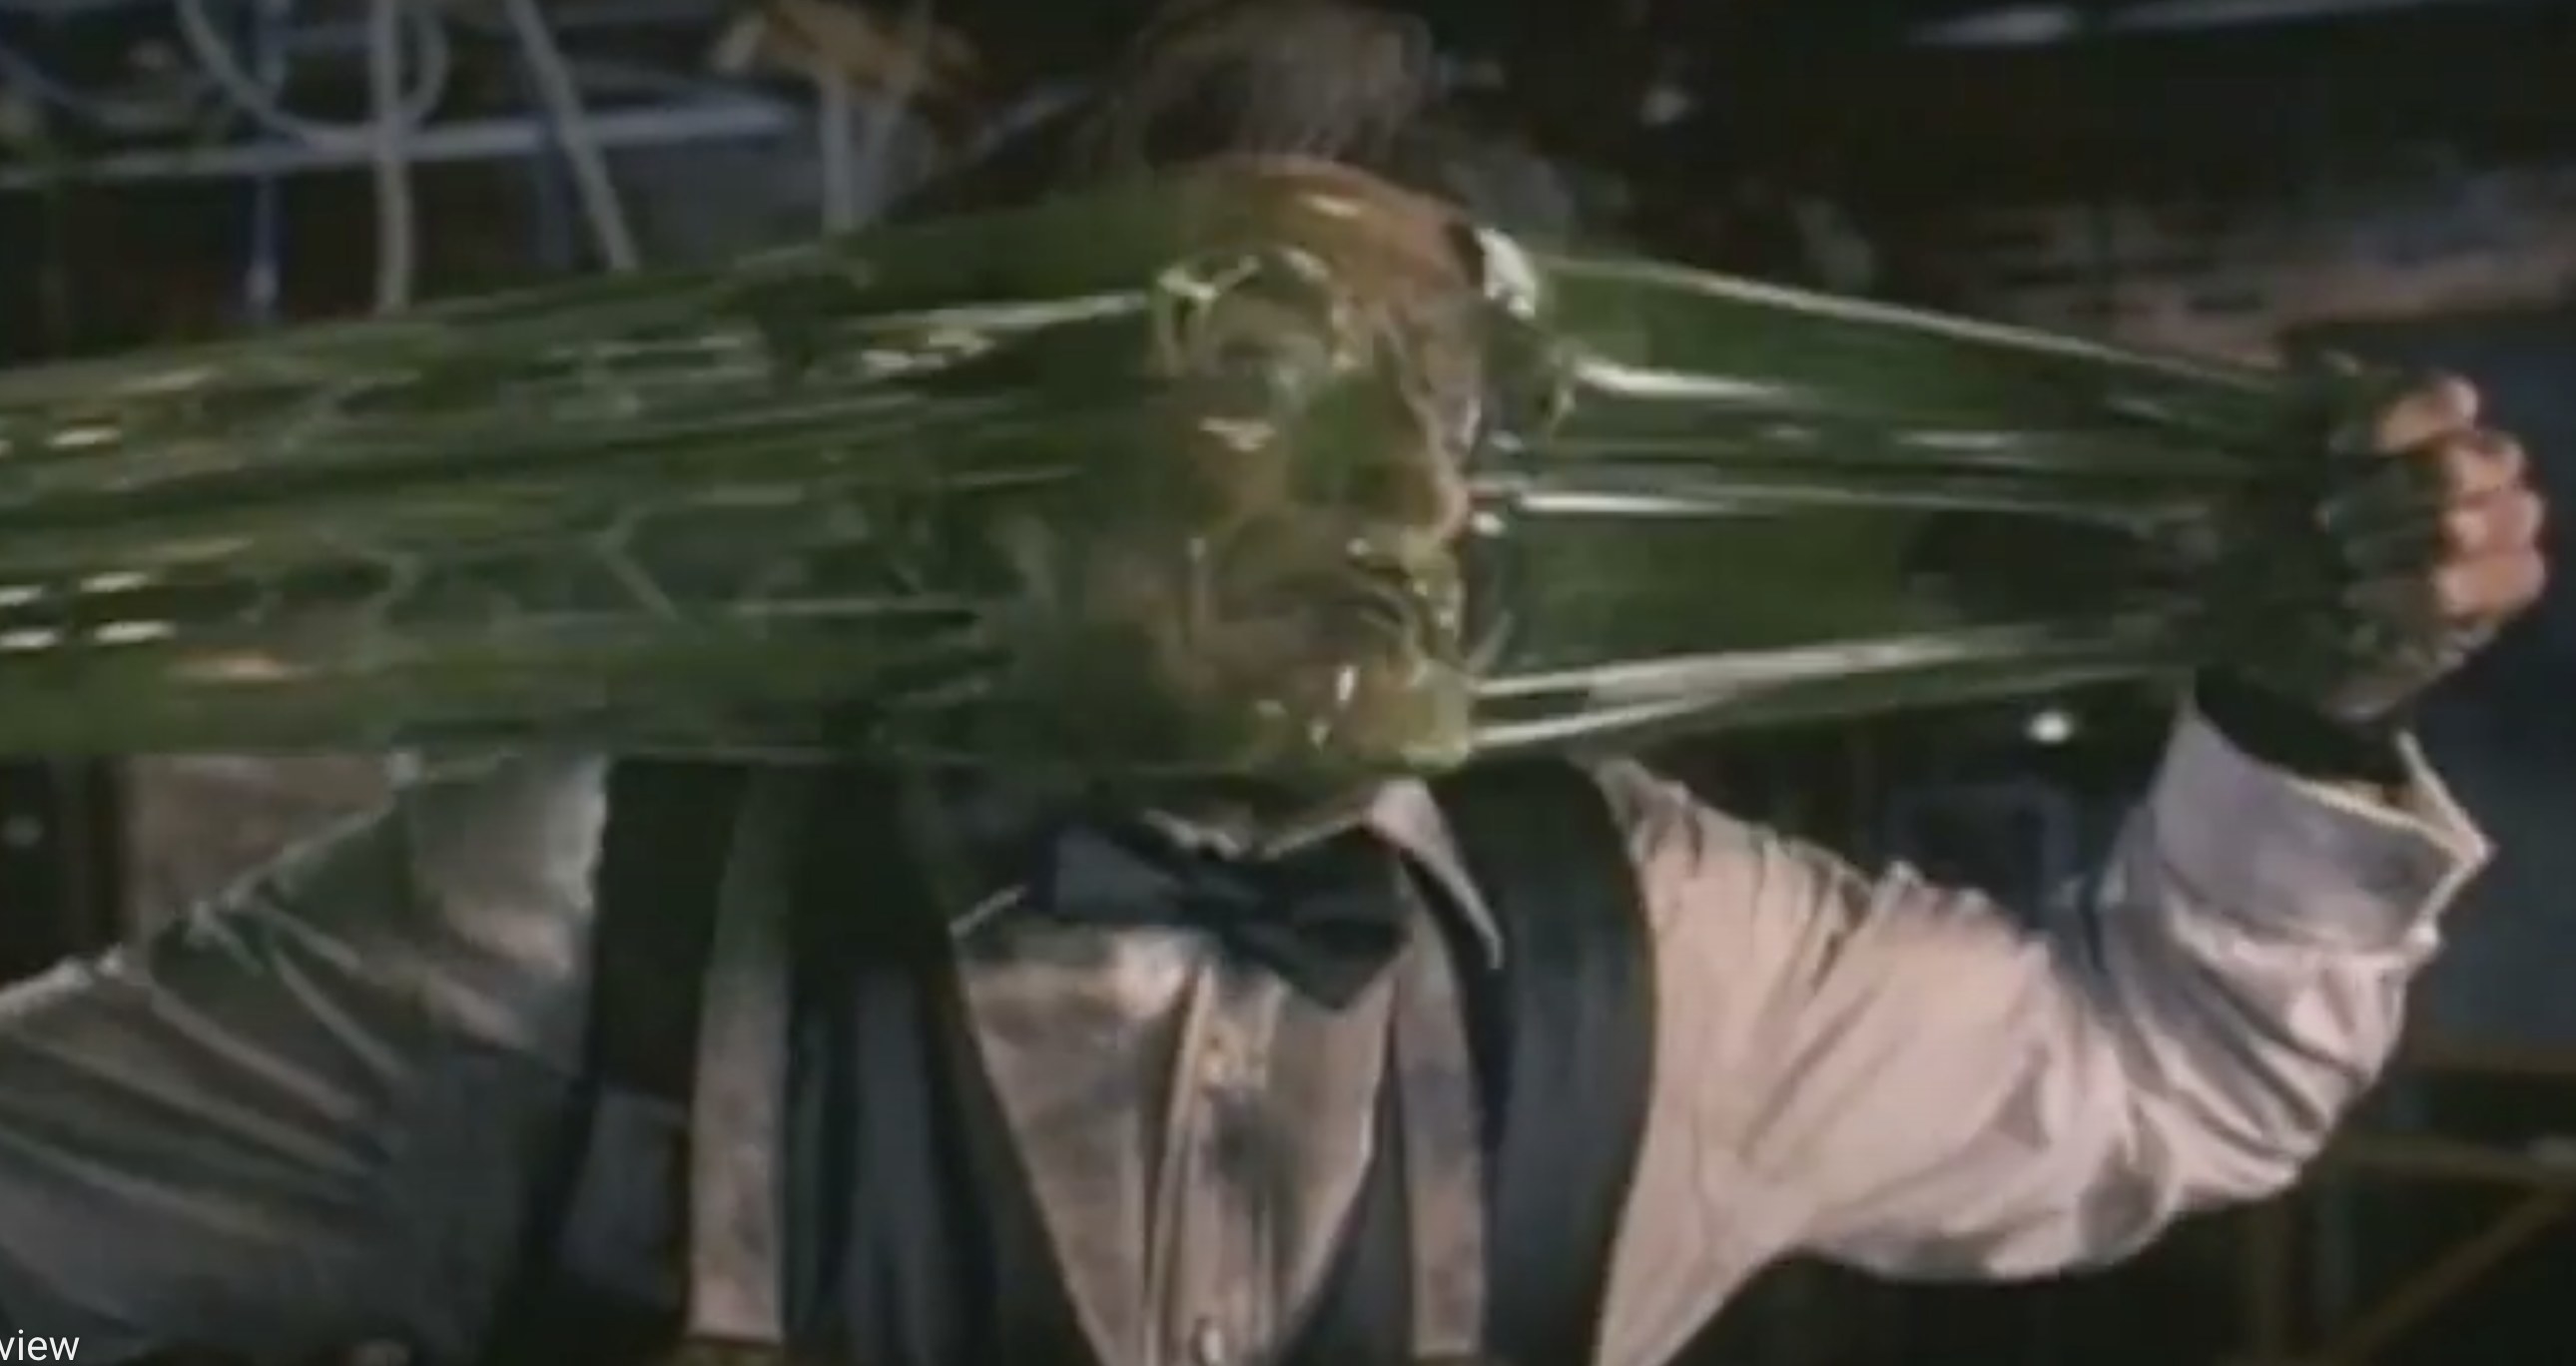 Actor Robin Williams stretches a green transparent slime across his face.